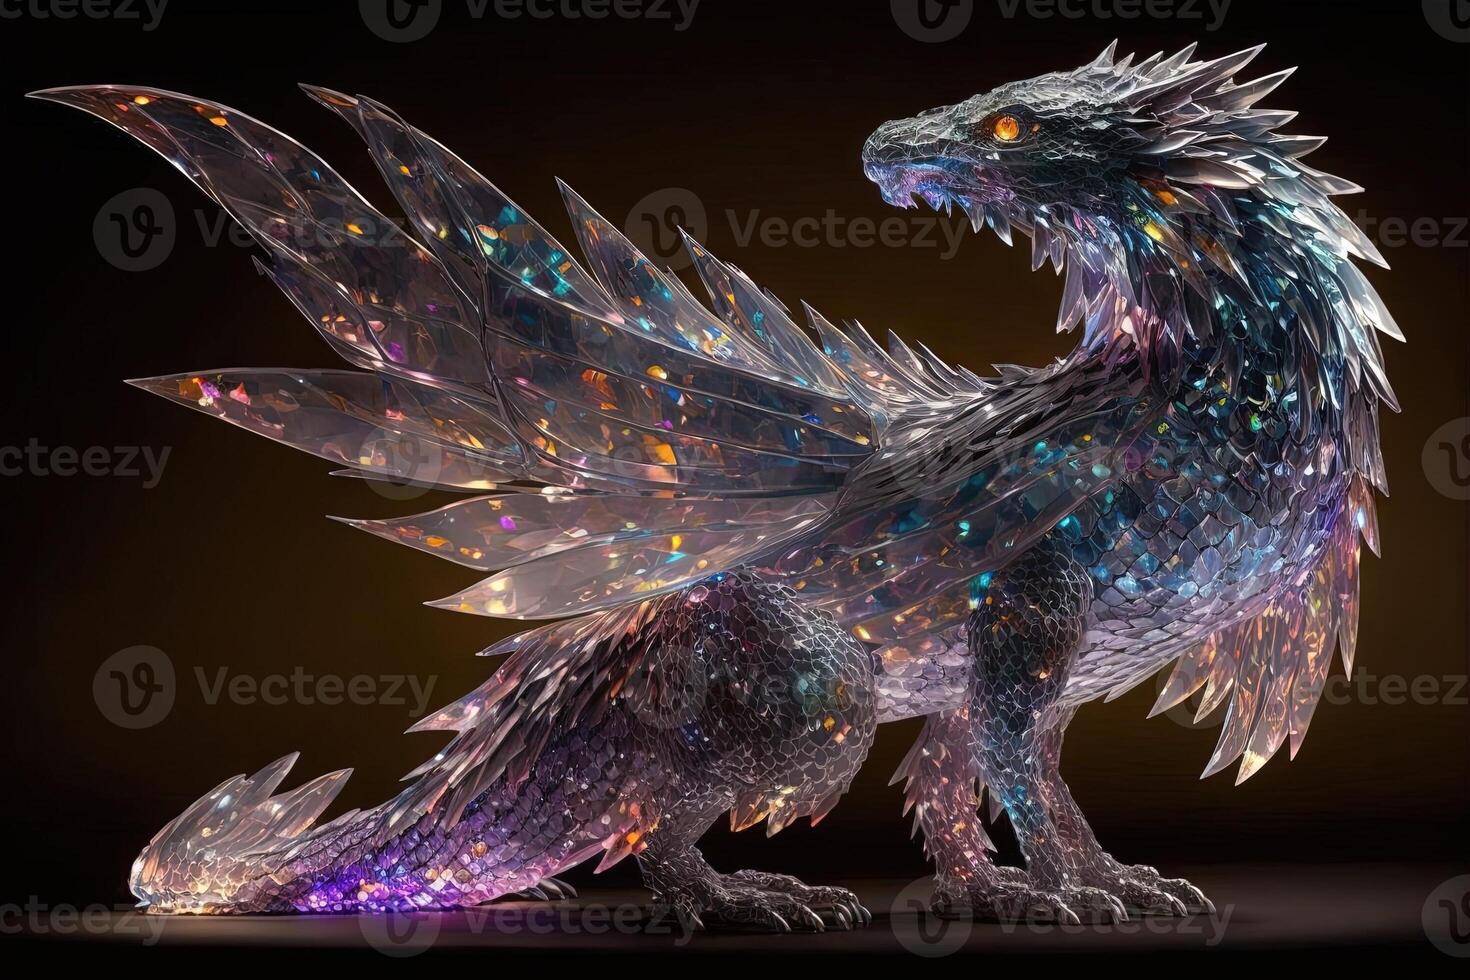 Giant, otherworldly creature made out of translucent crystal, with thousands of shimmering facets that reflect light in a dazzling display illustration photo